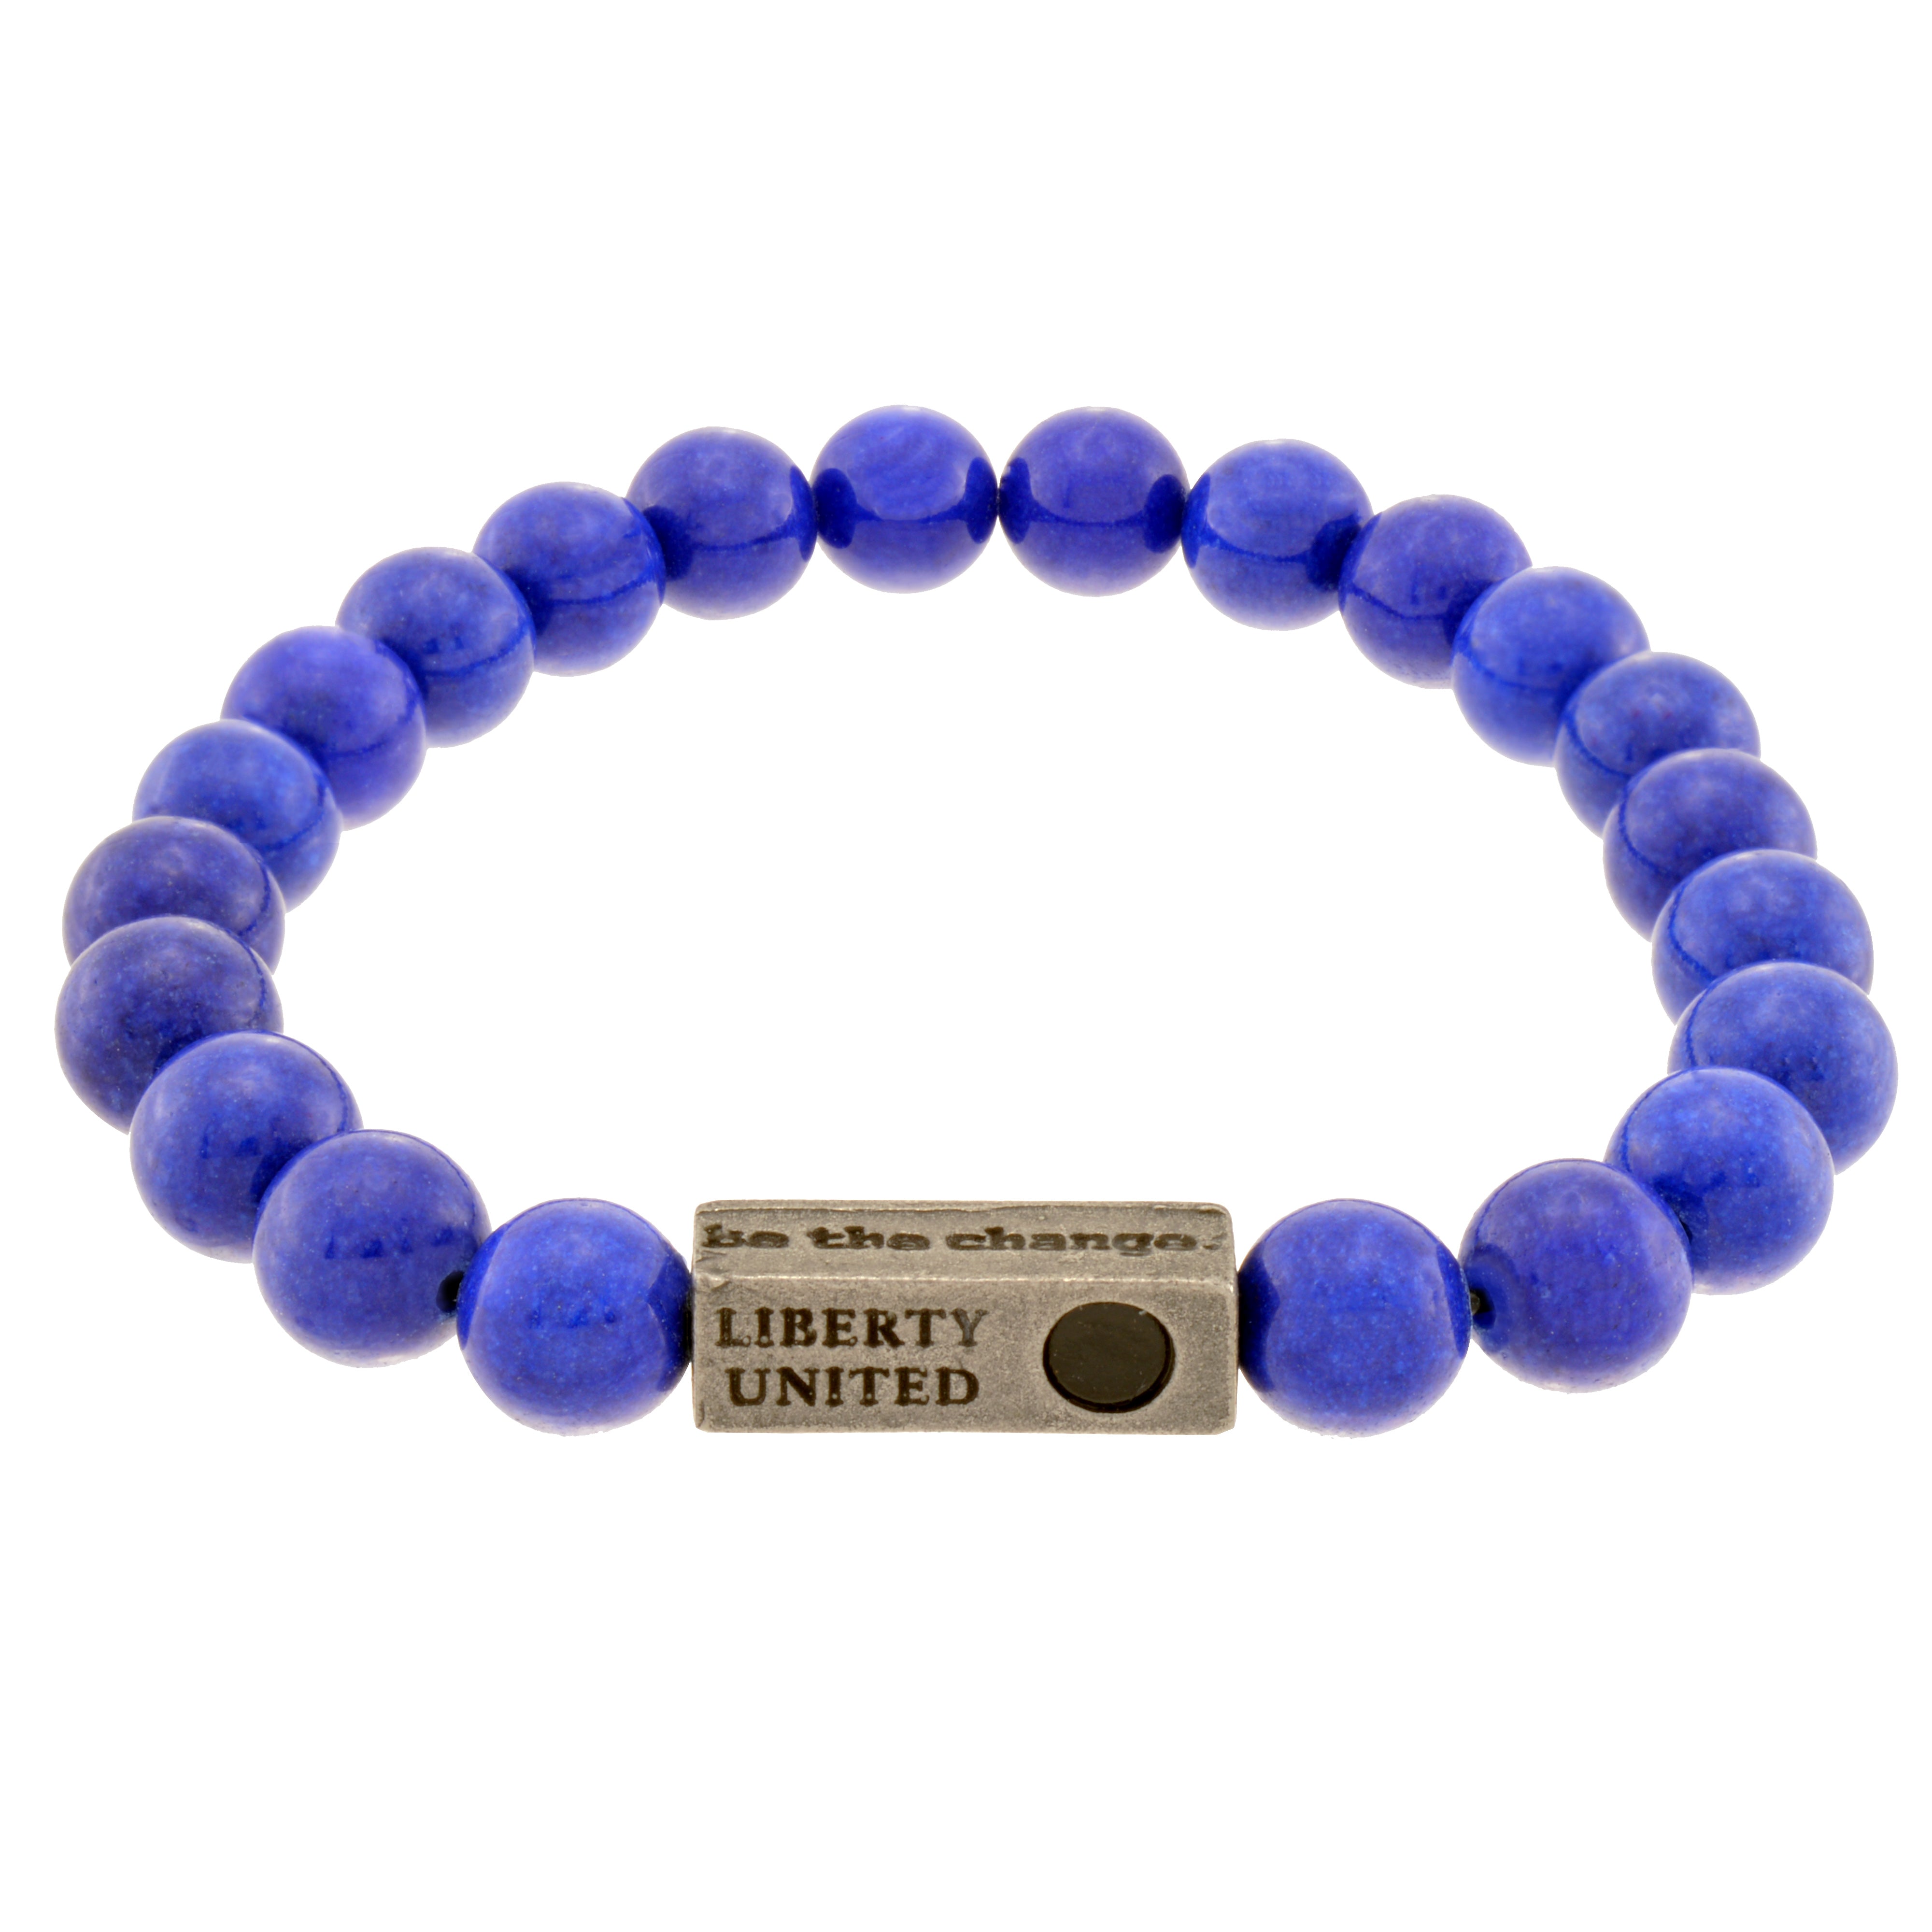 BE THE CHANGE Bracelet – Empower Bands